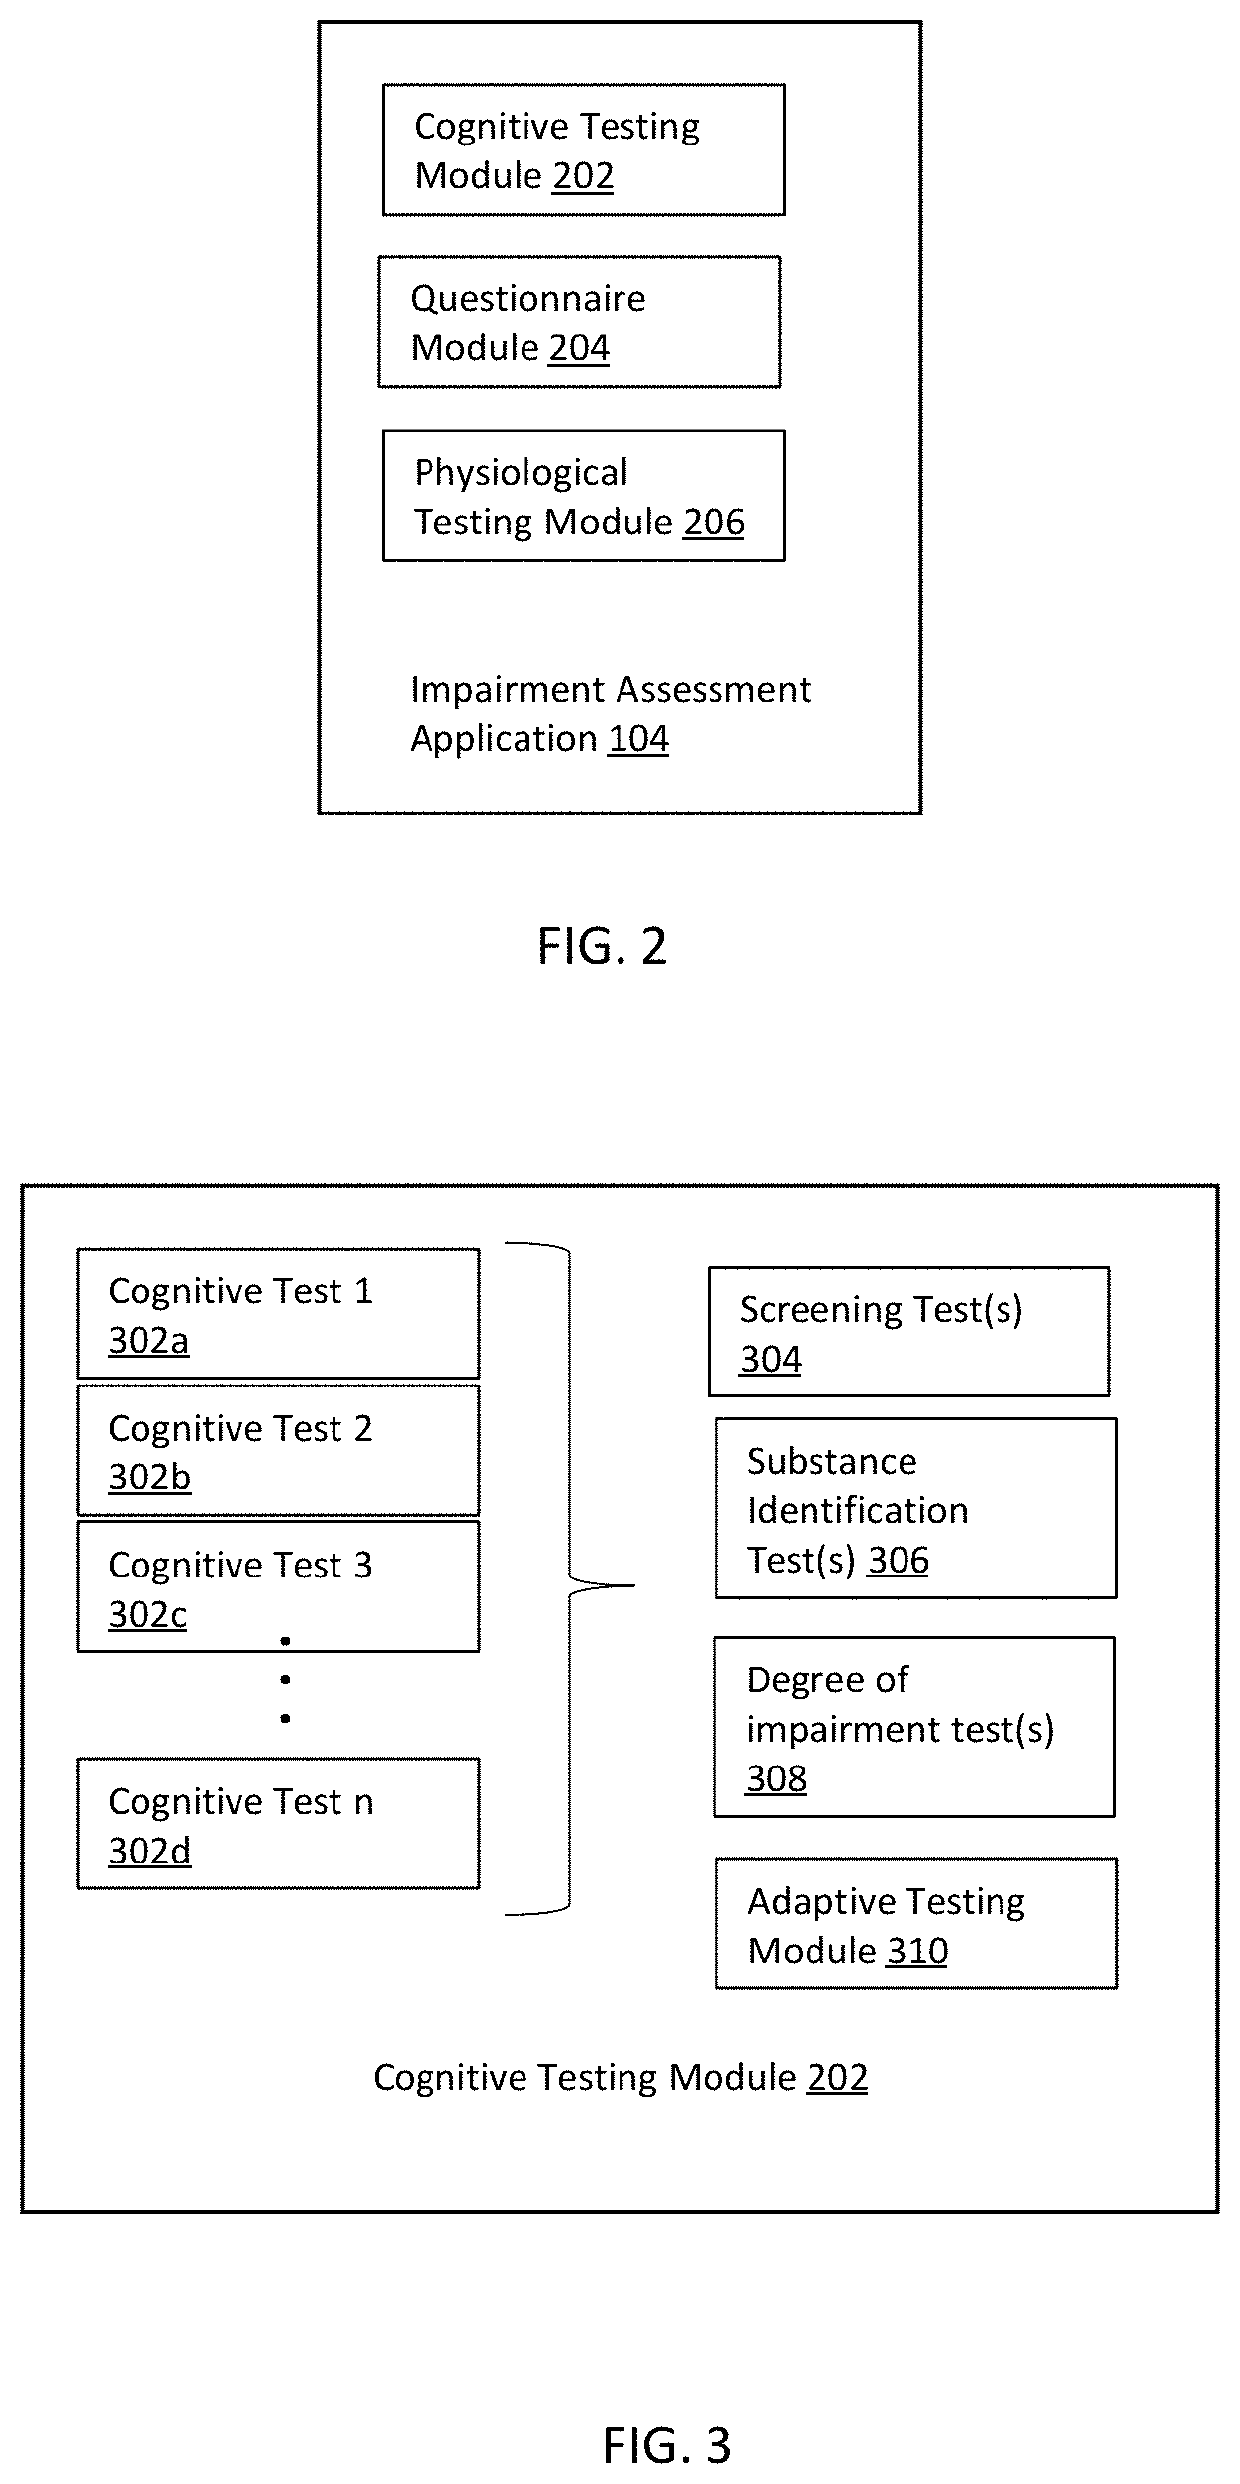 Digital Physiological Neurocognitive and Behavioral Impairment Assessment Systems and Methods of Using the Same